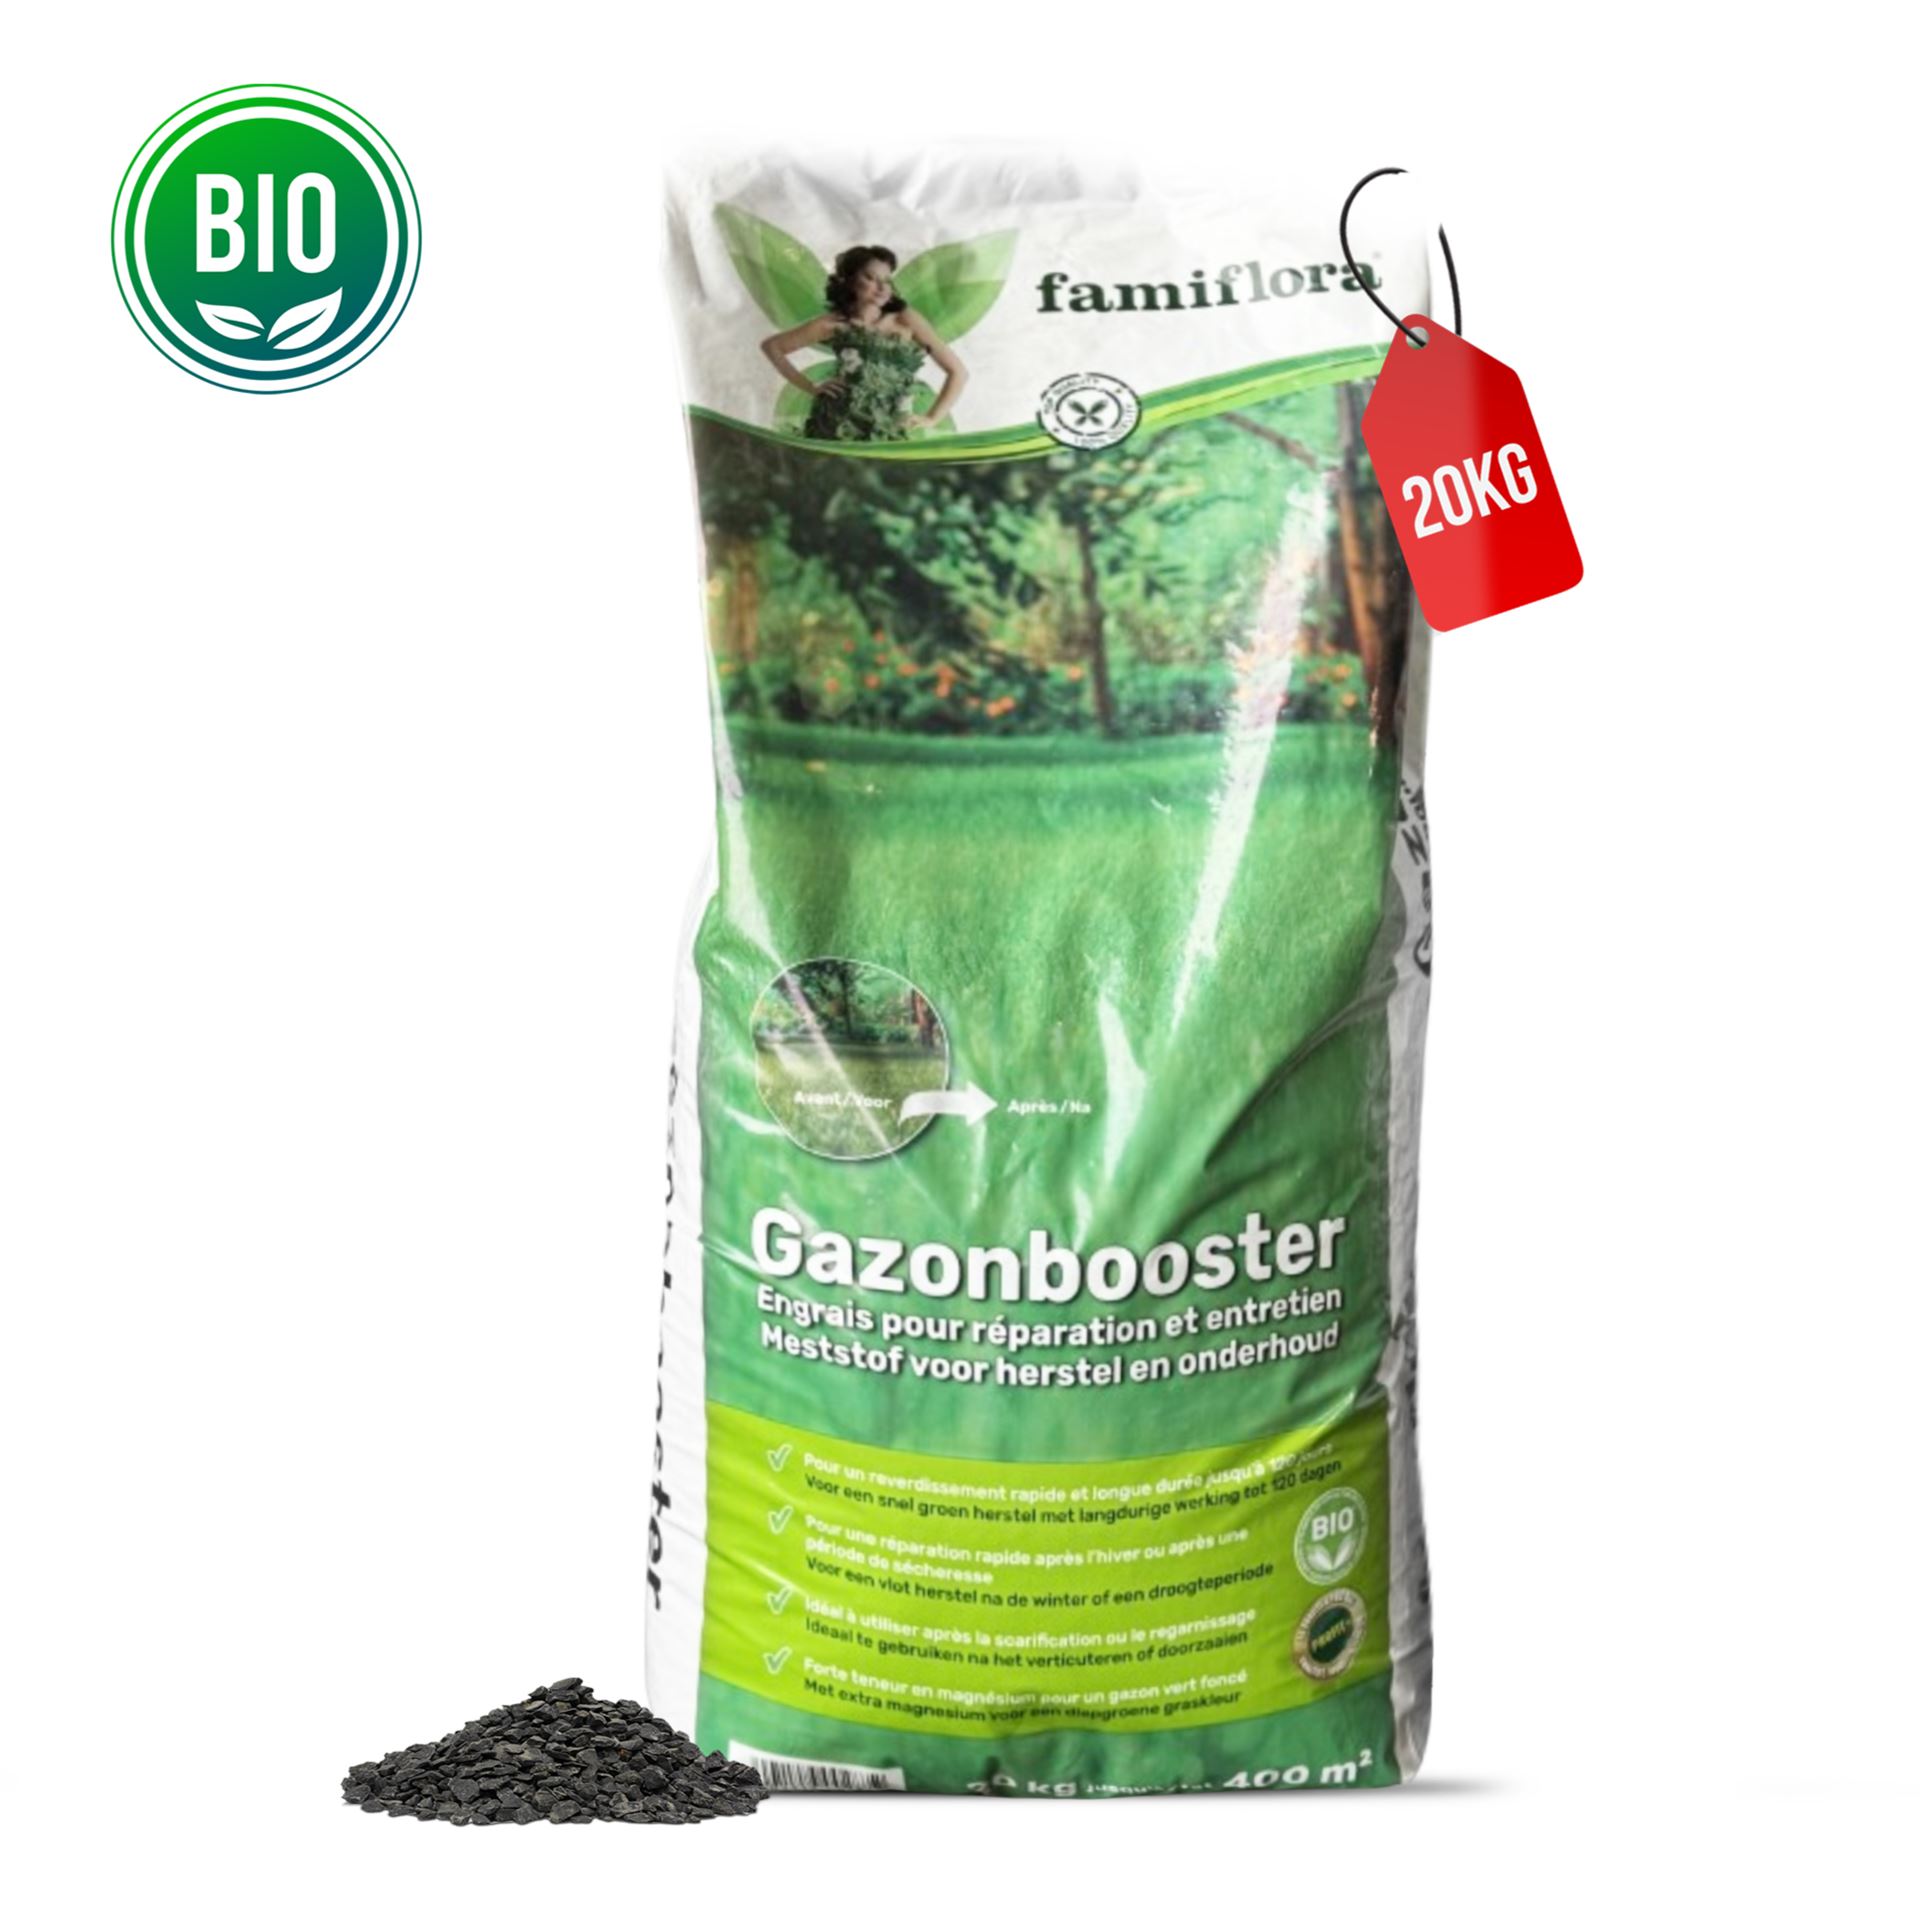 Famiflora BIO Lawn Booster 20kg (up to 400m²)